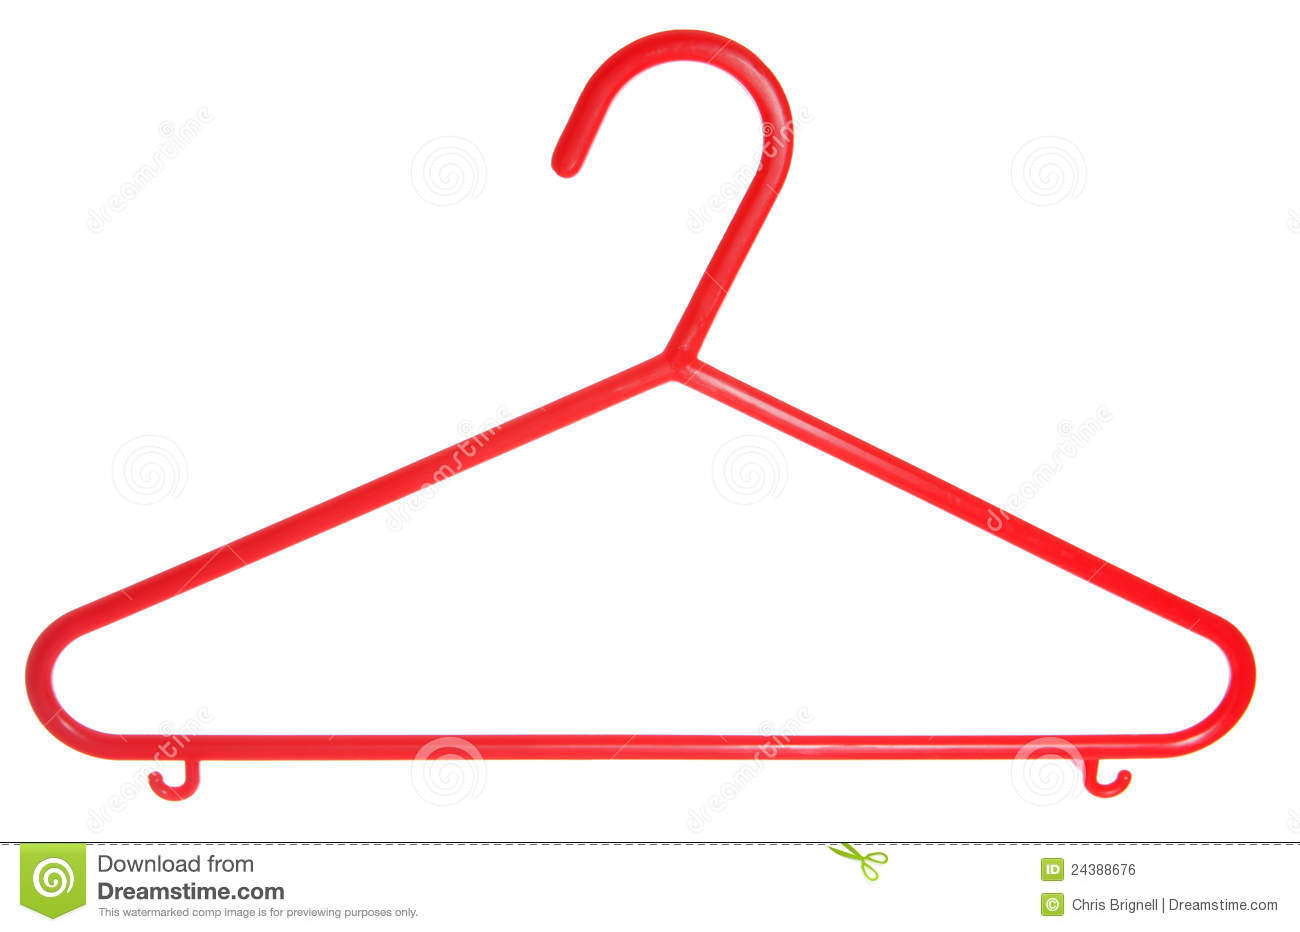 Red Childrens Plastic Coat Hanger Cutout Royalty Free Stock Image